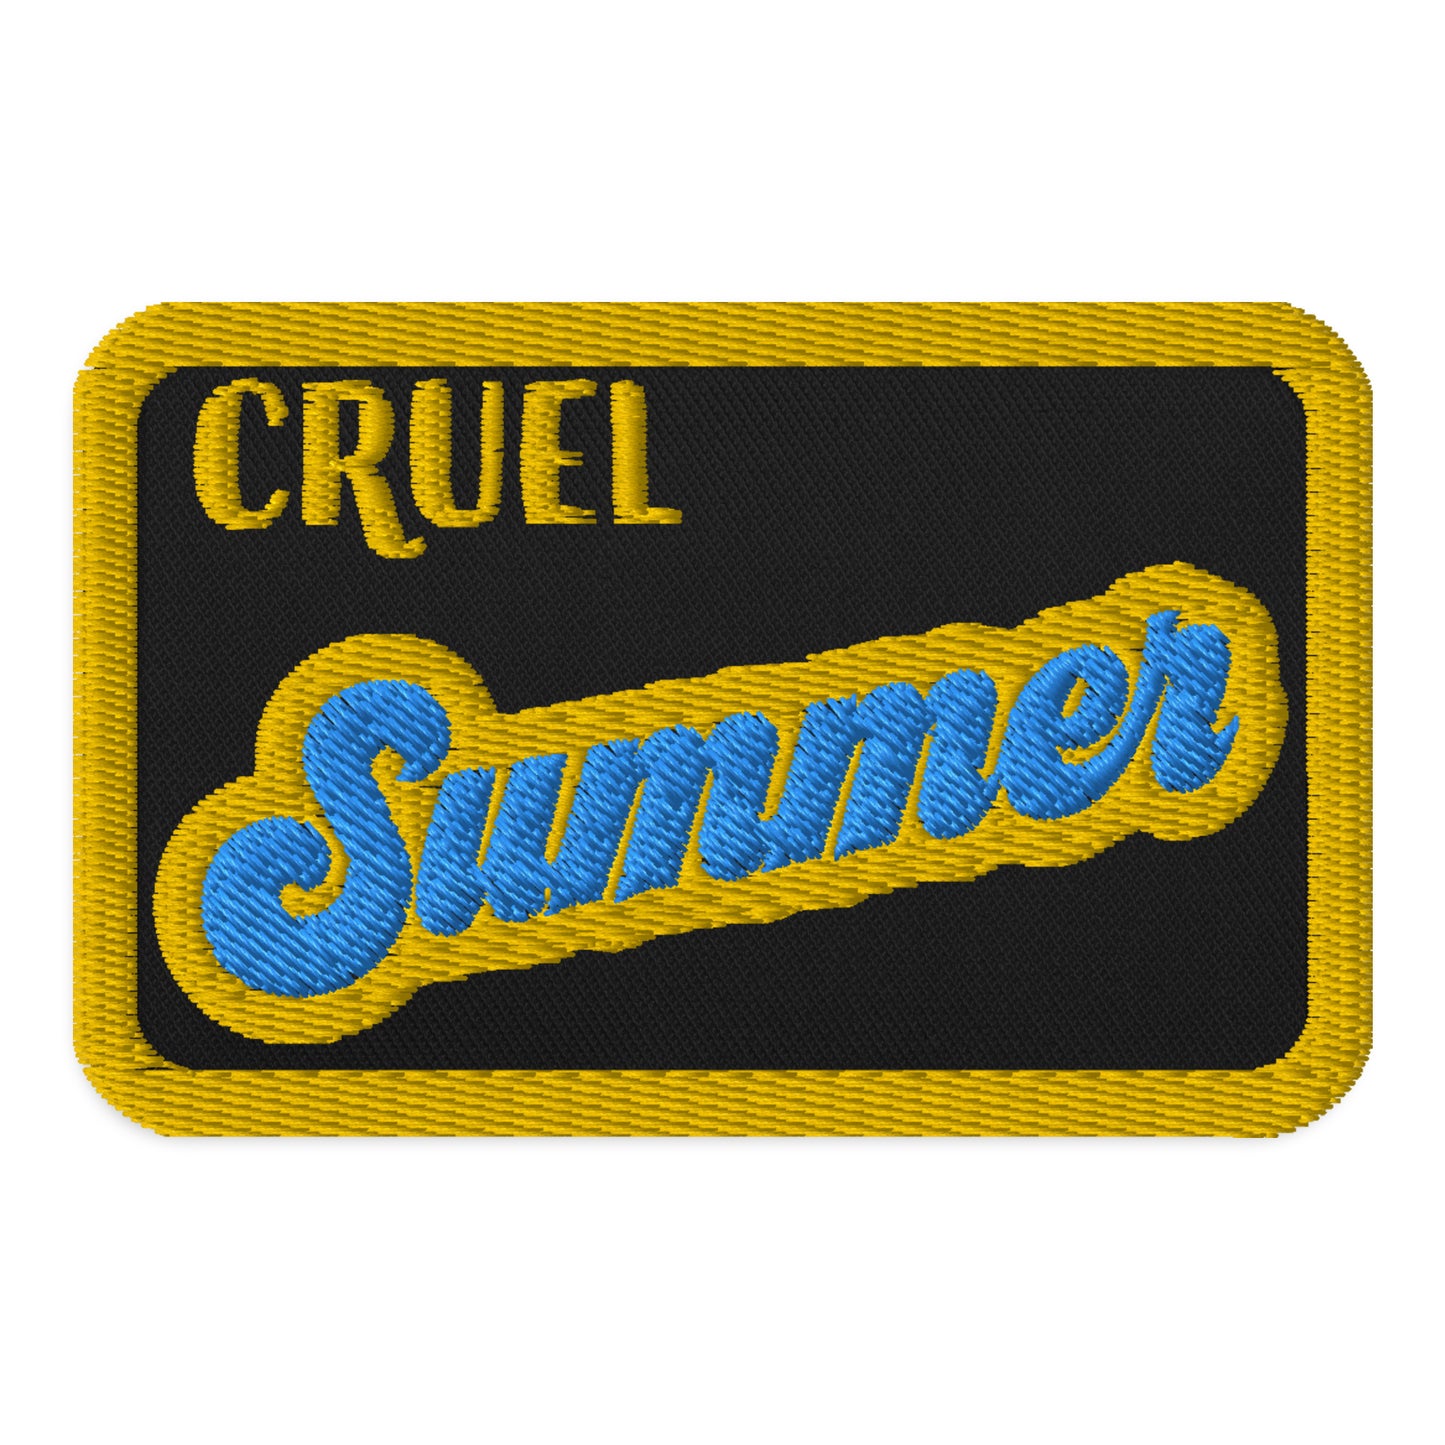 Actual Fan Made Merch: Cruel Summer Retro Embroidered patches